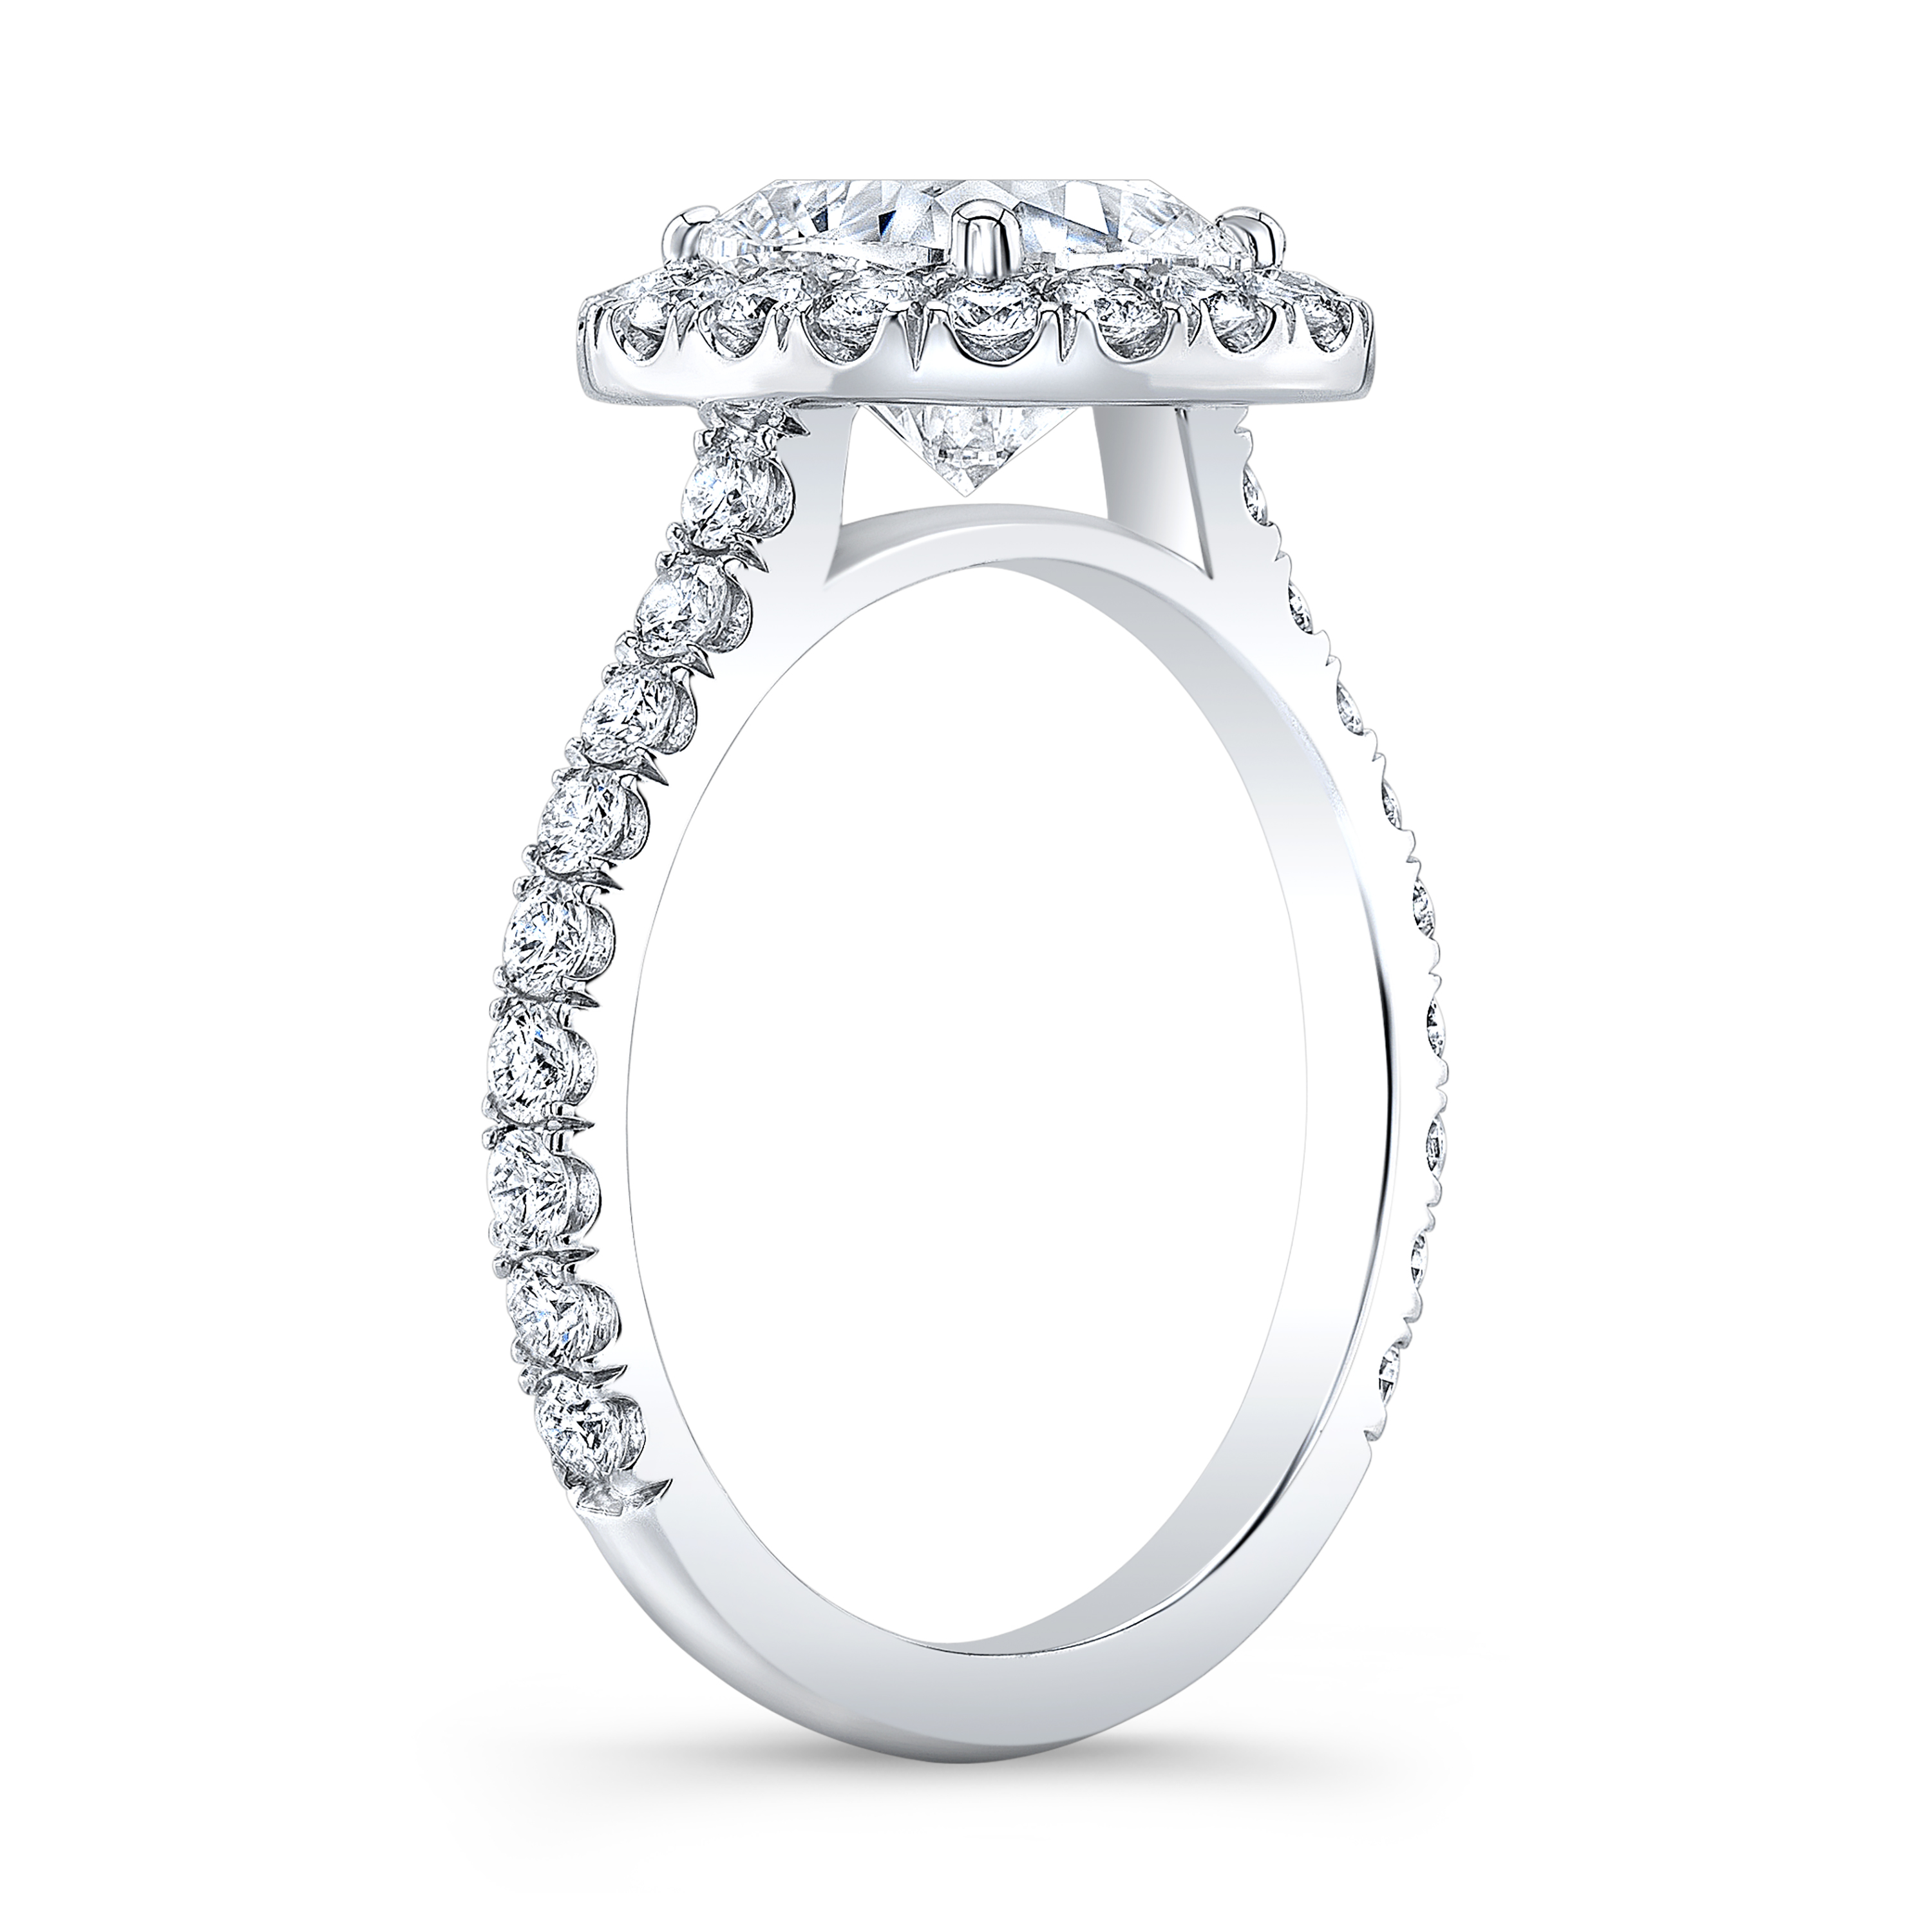 Cathedral Halo U shaped Setting 2 carat center diamond in White gold 